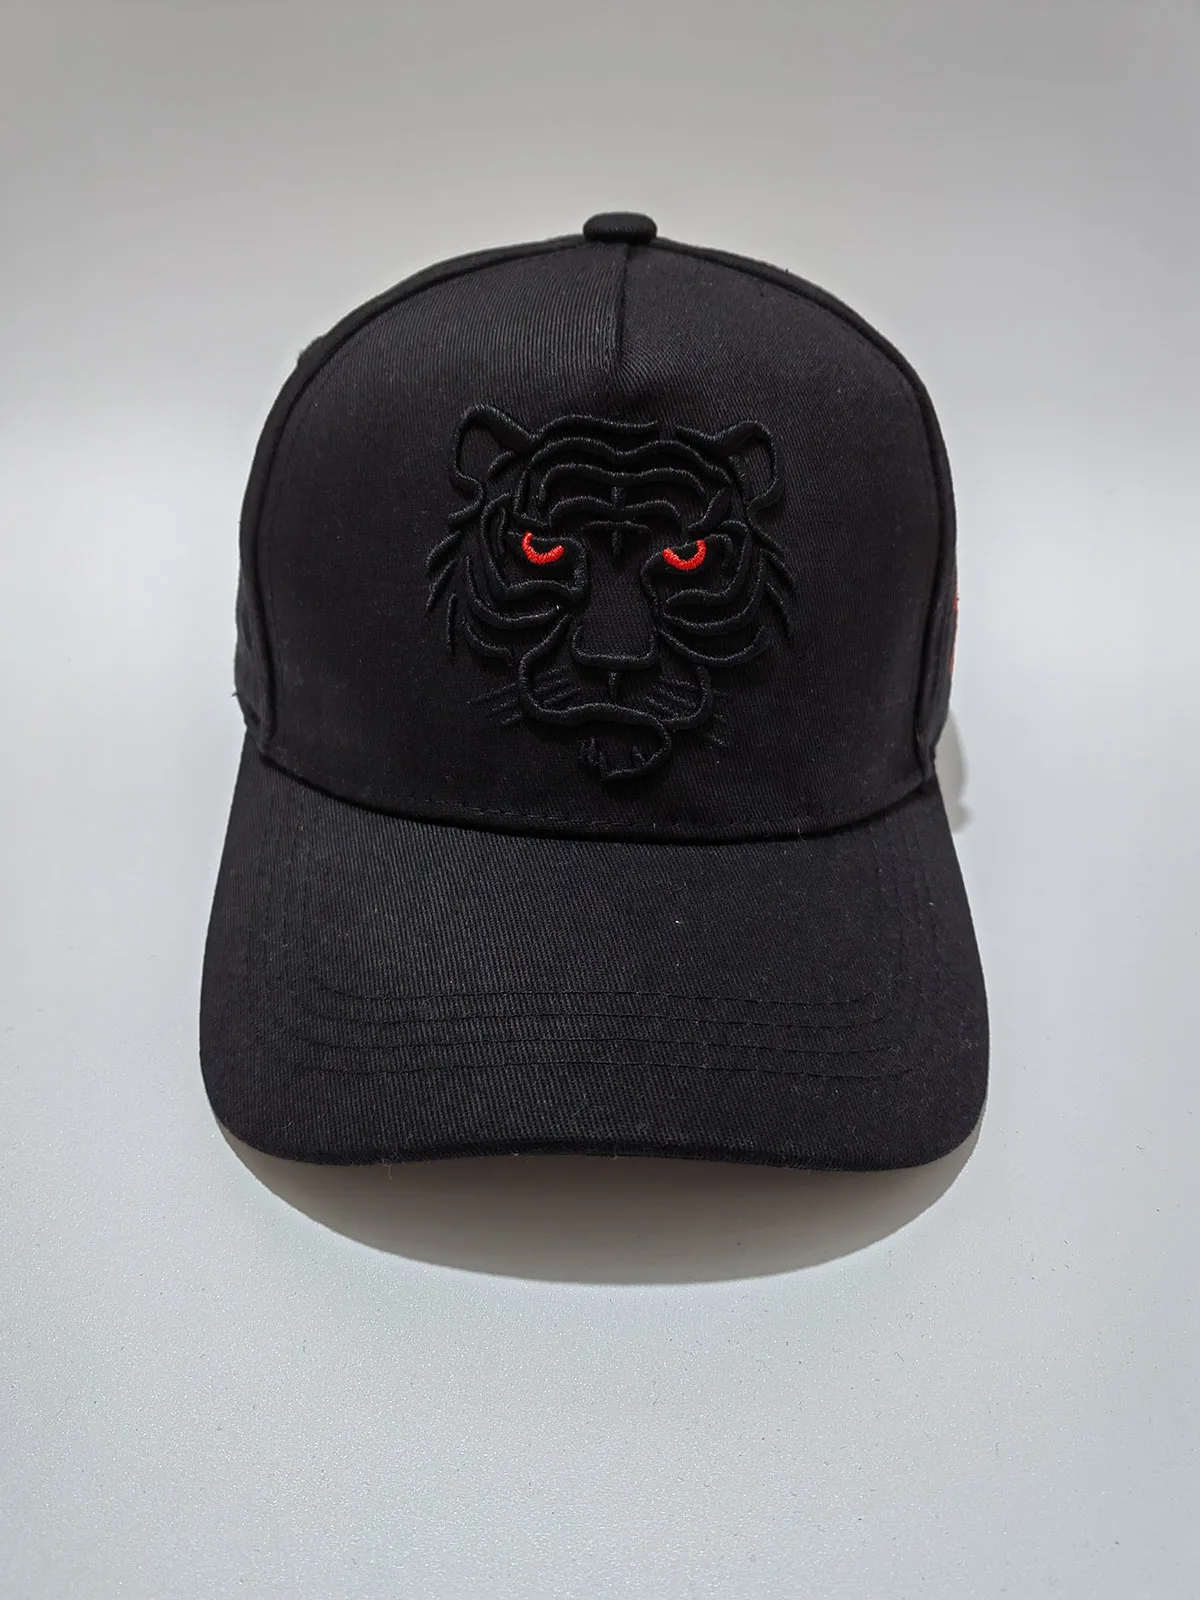 Retro Baseball Cap For Men And Women Fashion Washed Cotton Tiger Head Embroidery Snapback Hat Spring Summe Sun Visor Cap Lover